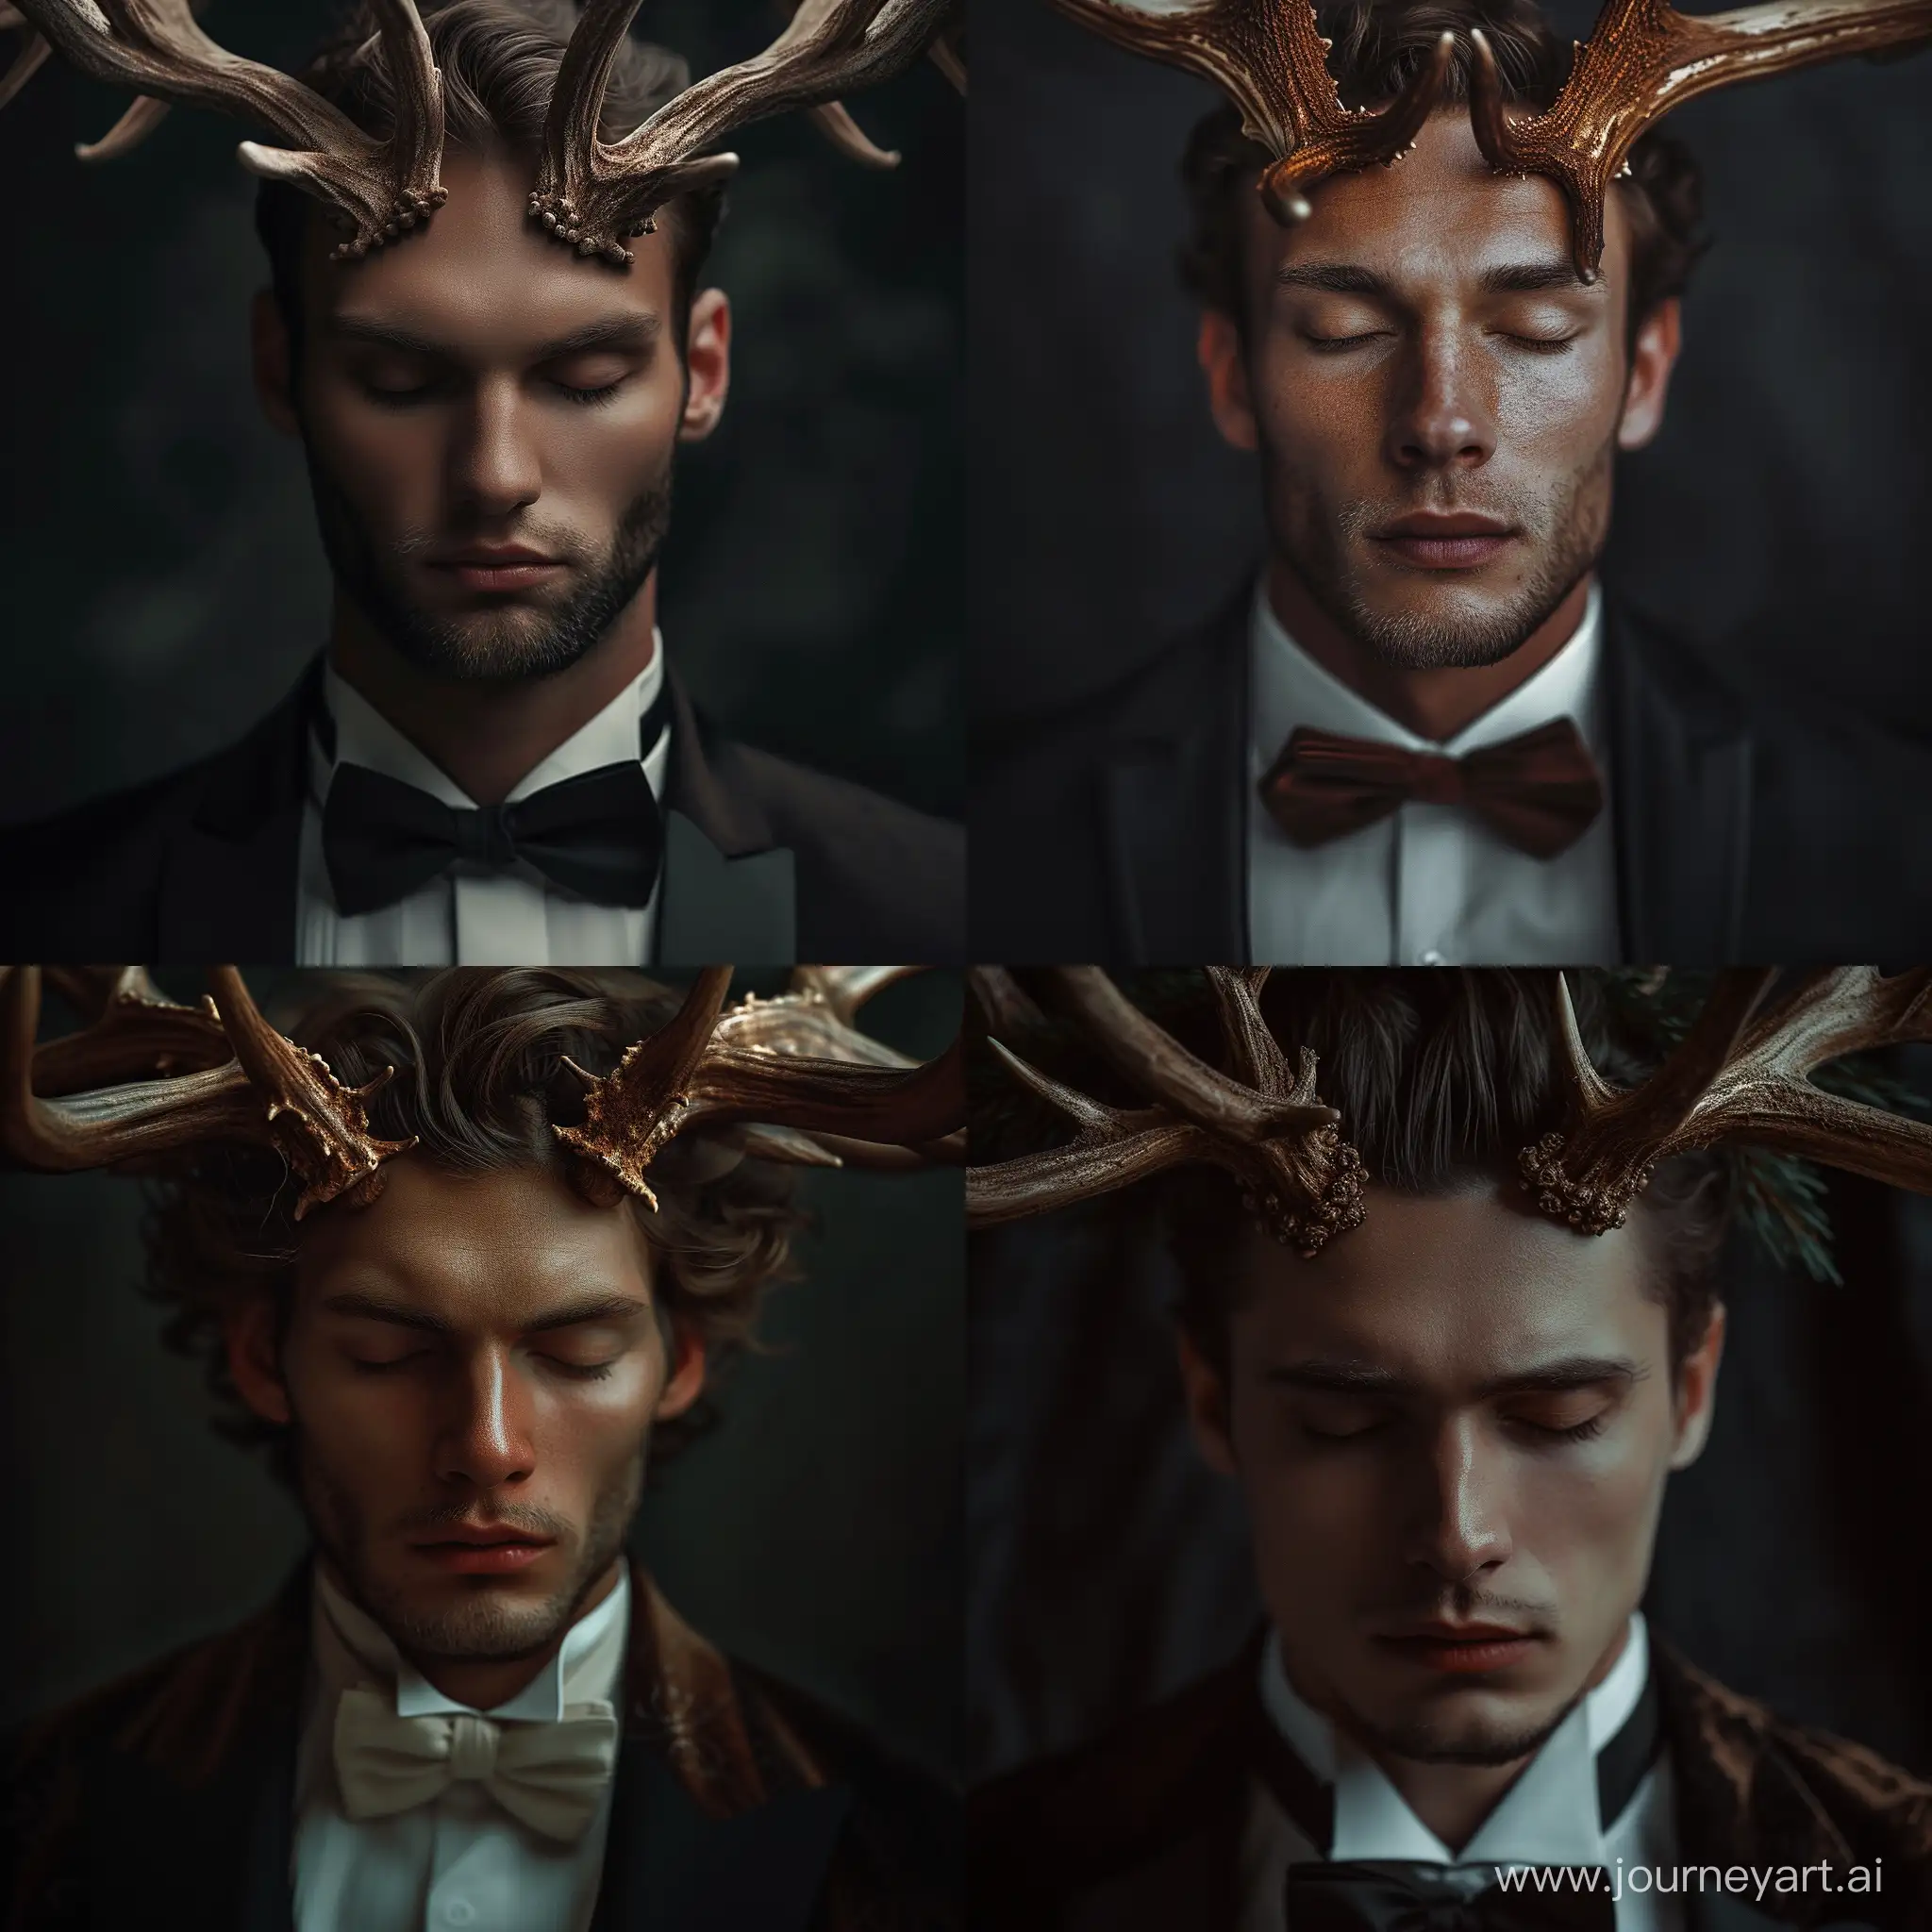 Elegant-Man-with-Deer-Antlers-in-Luxurious-Tuxedo-Captivating-and-Mysterious-Portrait